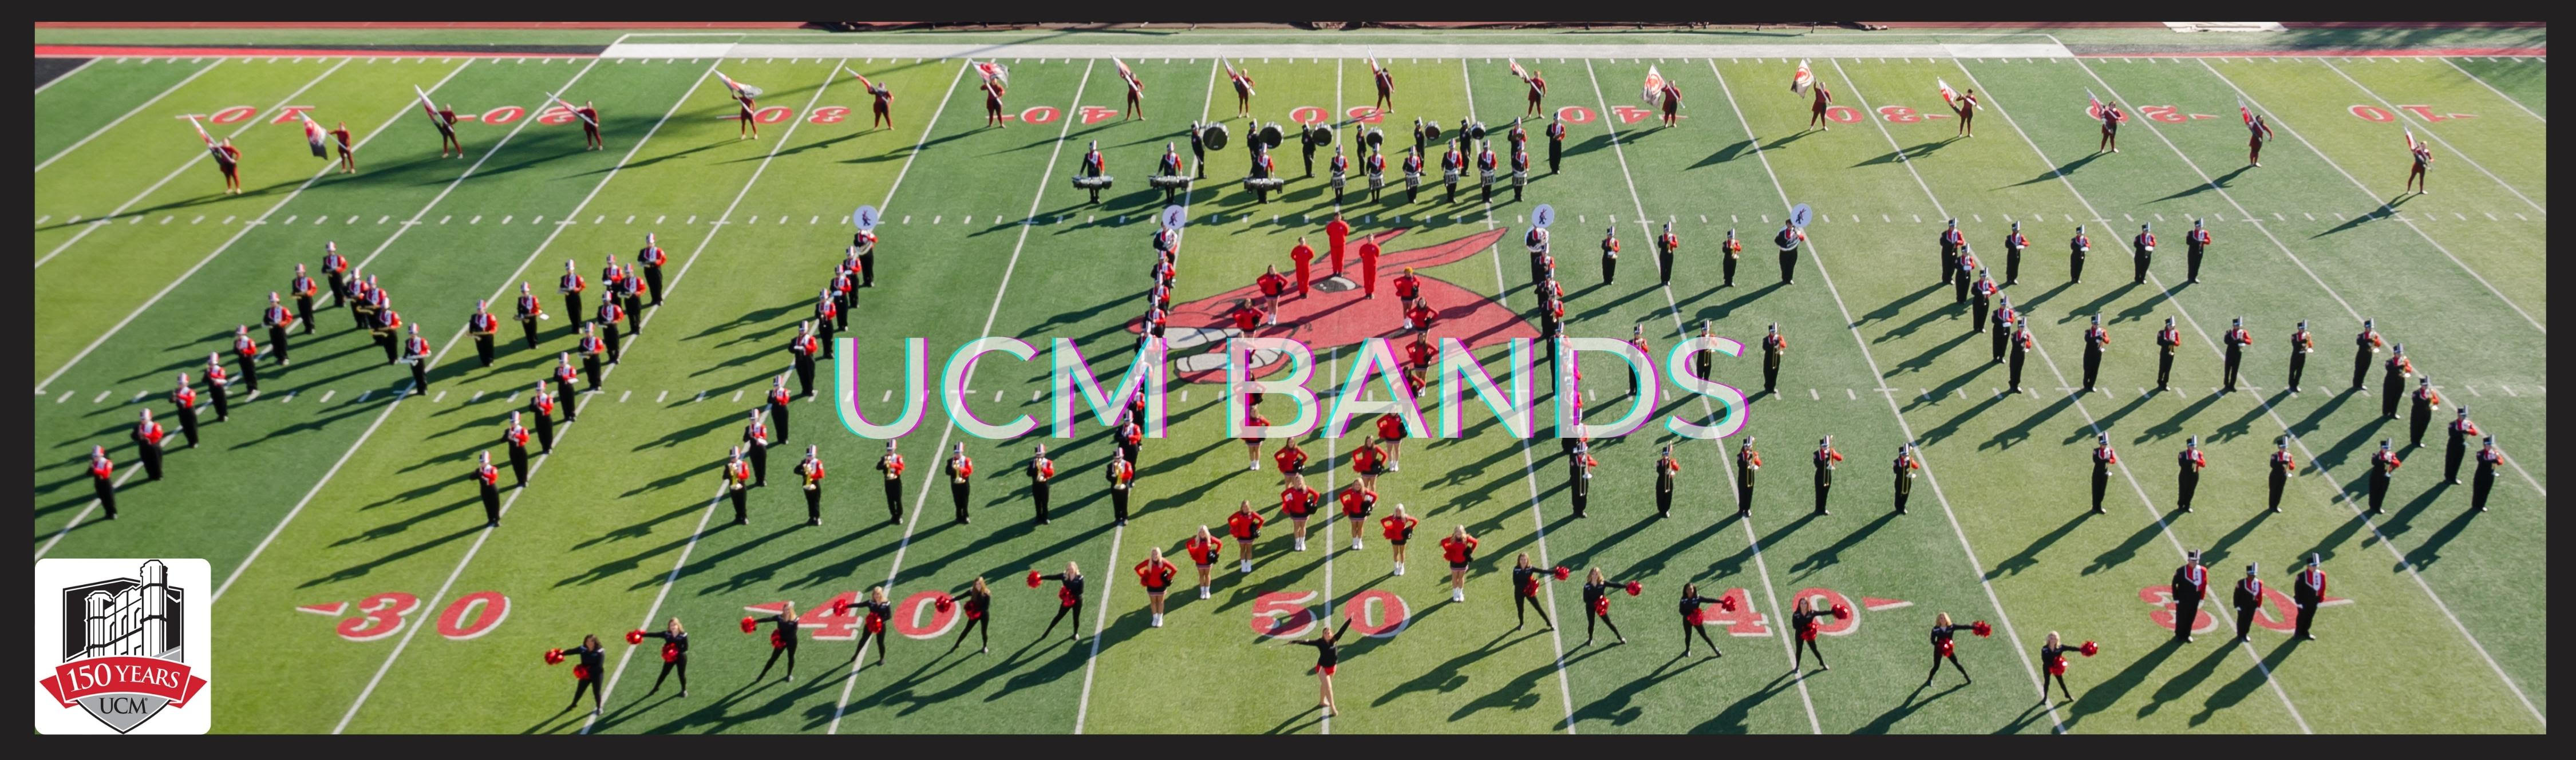 UCM Marching Band spelling "Mules" with UCM 150 year logo.